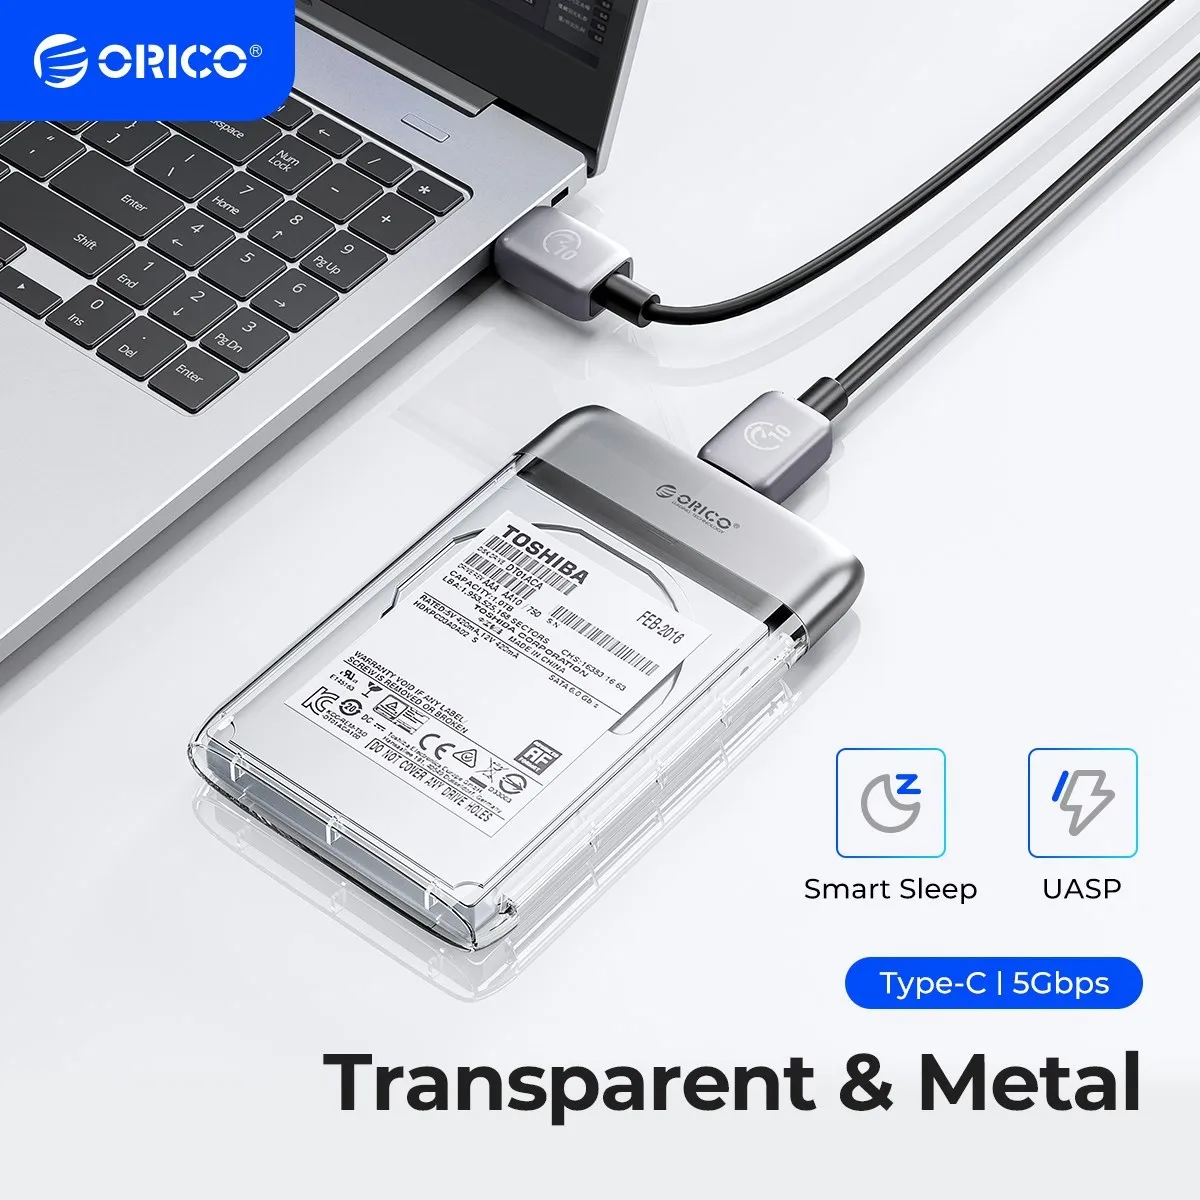 

ORICO 2.5 inch Transparent Type-C Hard Drive Enclosure USB3.0 5Gbps Metal HDD Case Support Auto Sleep for PC Laptop Notebook